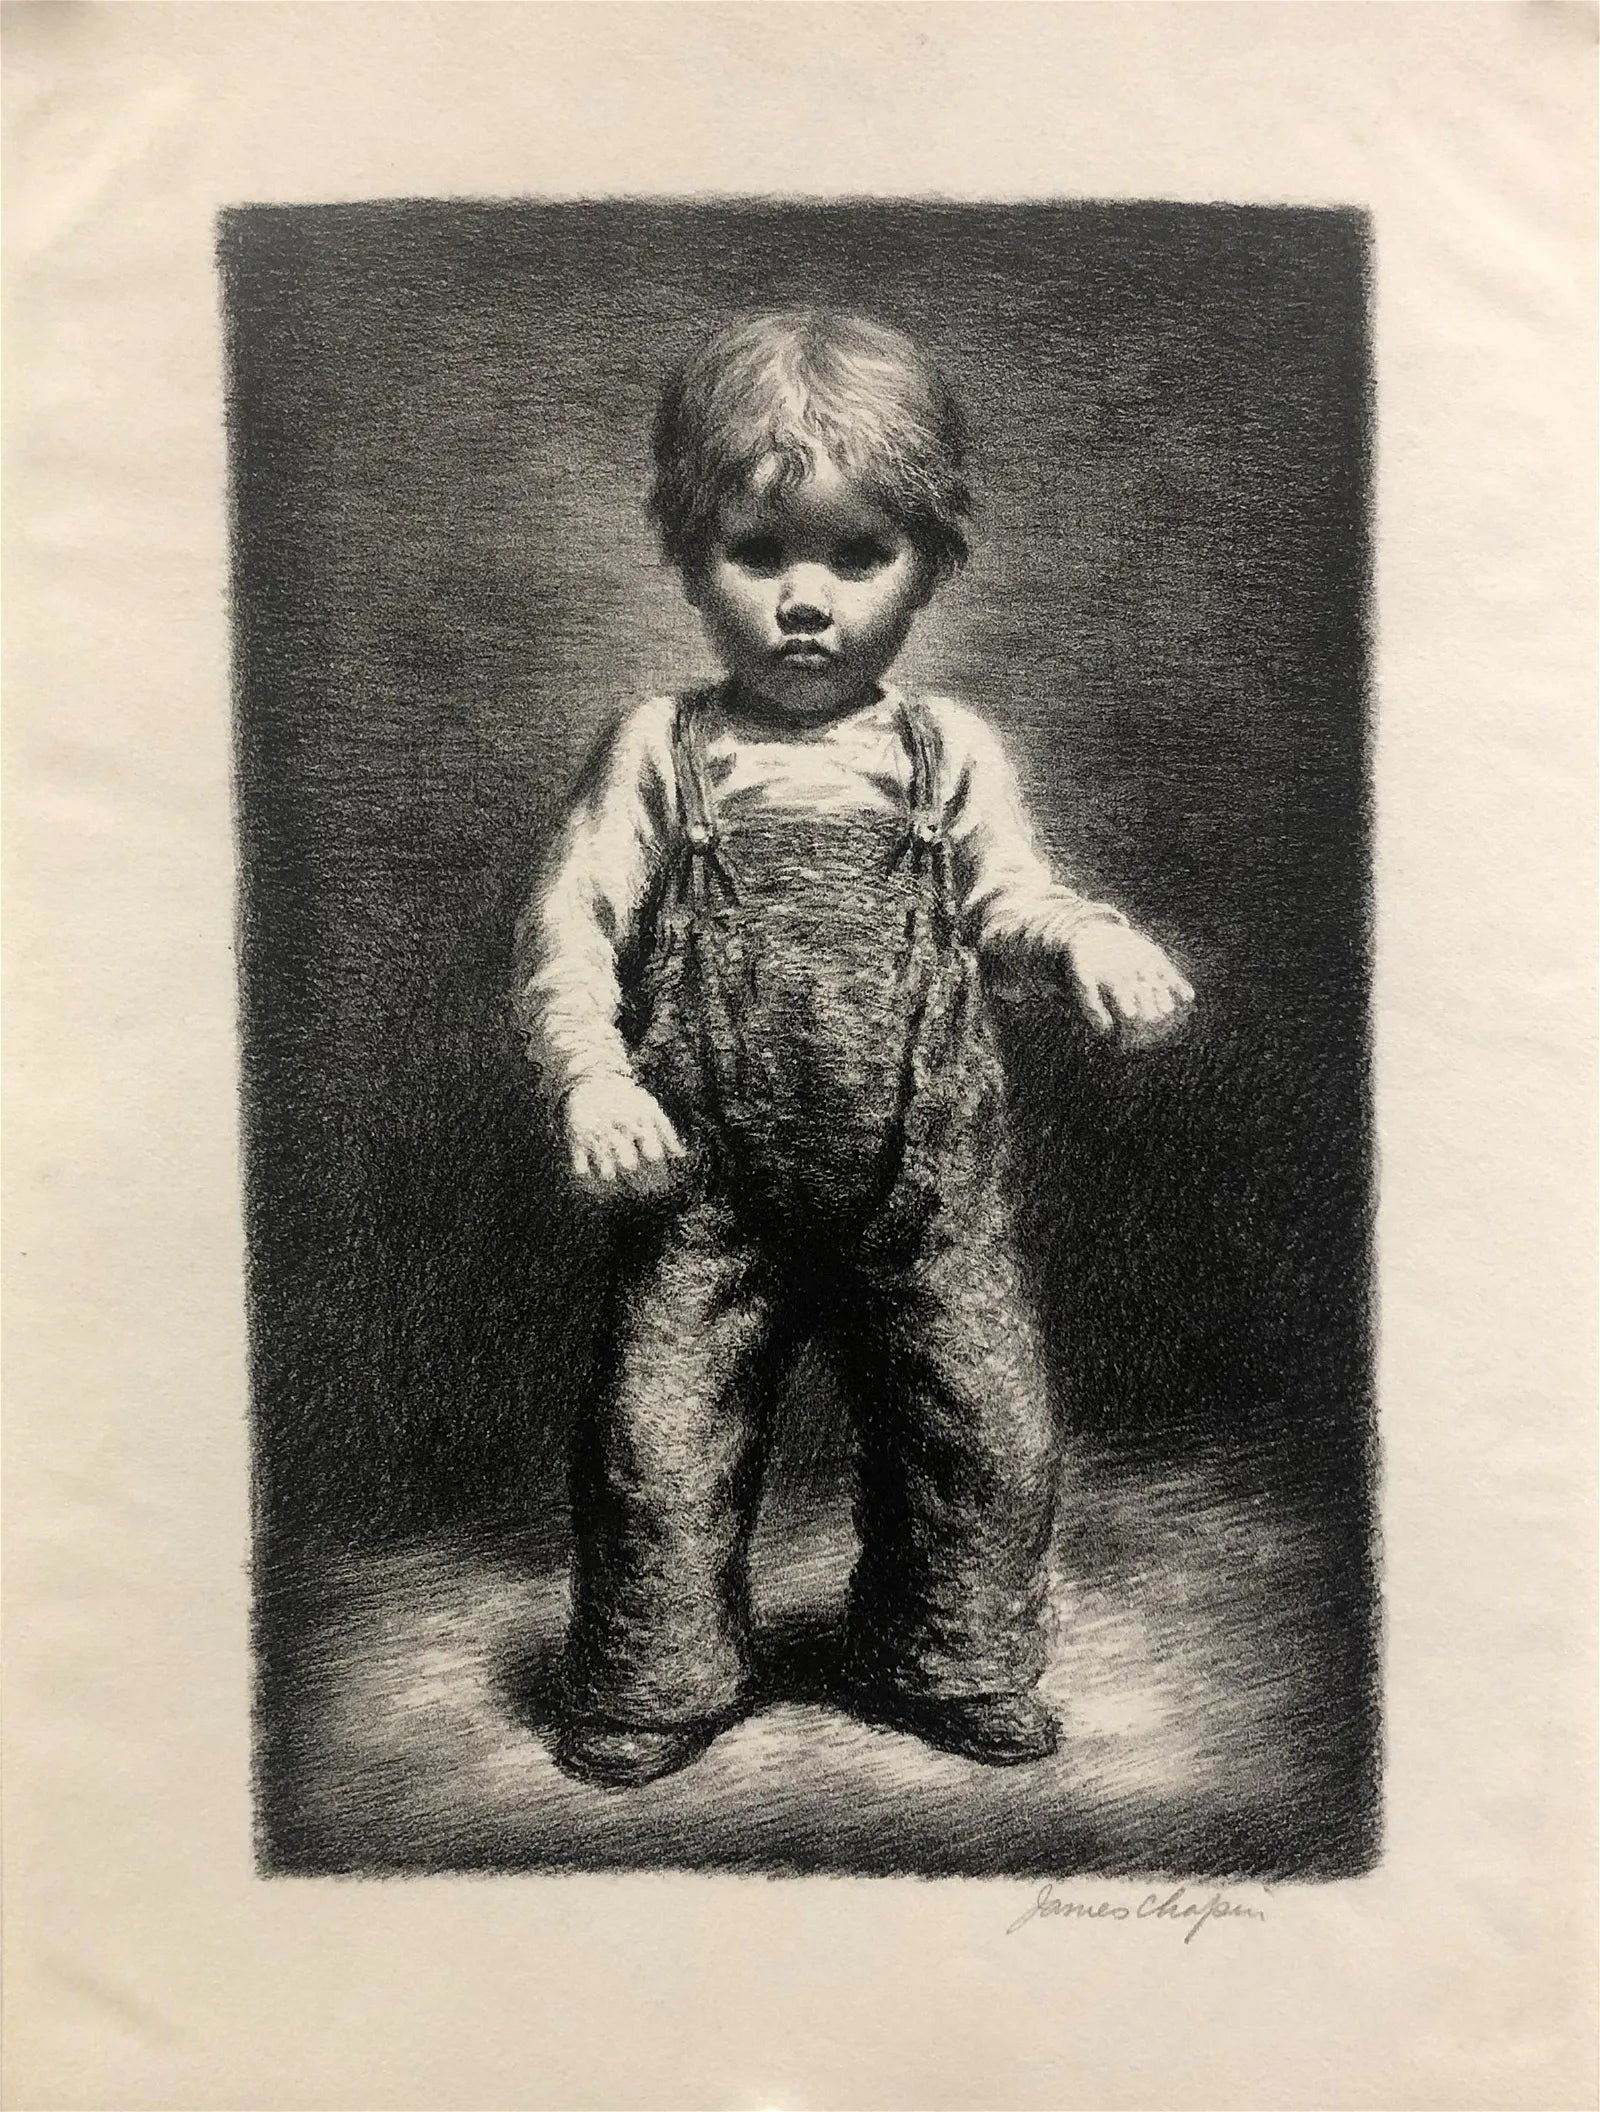 AW8-009: James Ormsbee Chapin - Circa 1943 - Lithograph - "Standing Child"